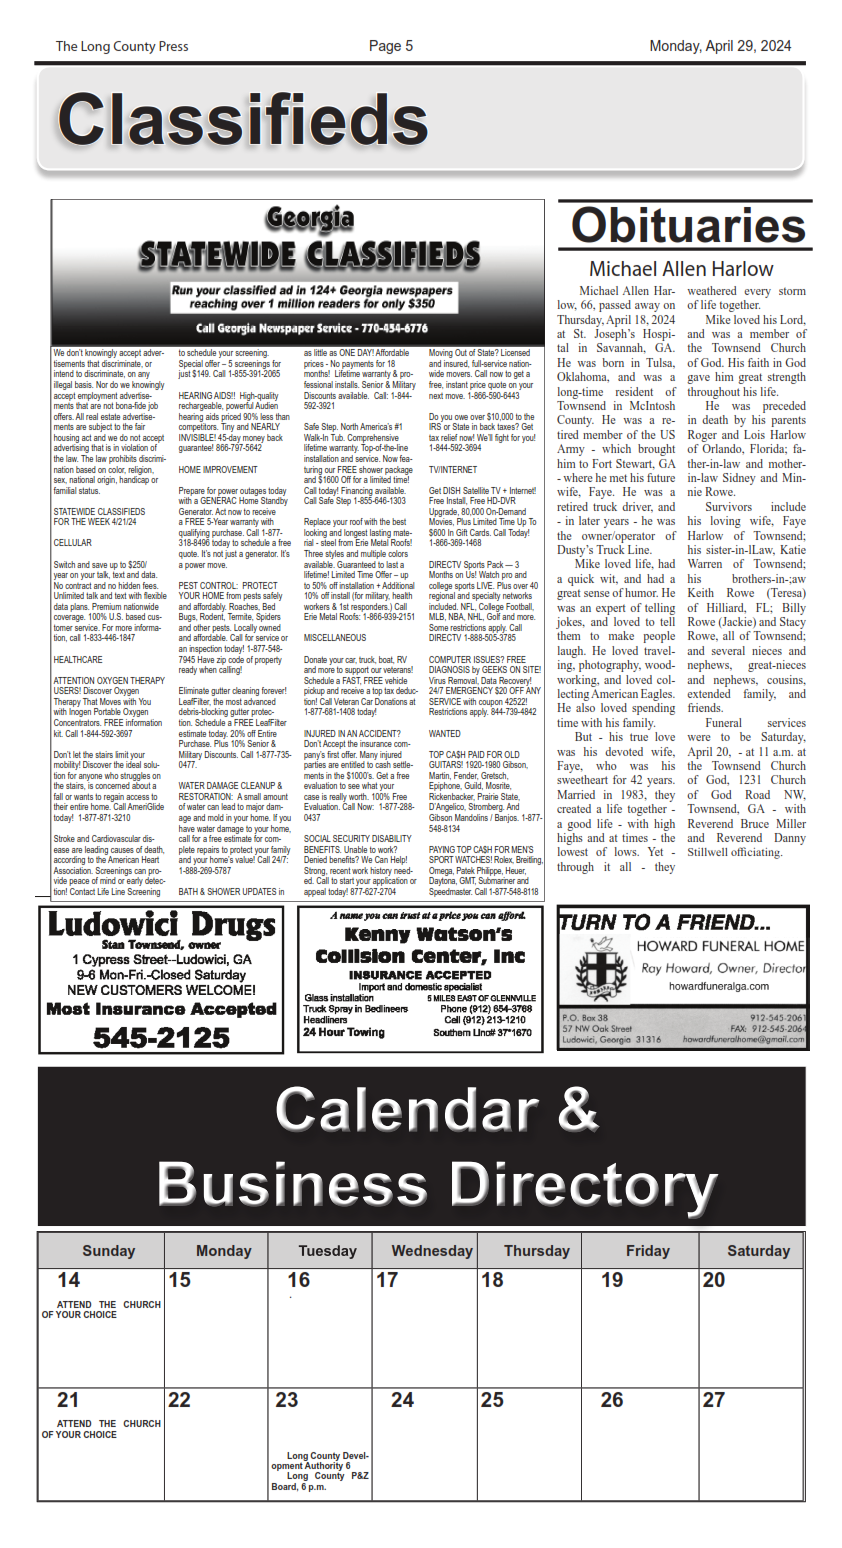 A page of a newspaper with a calendar and business directory on it.